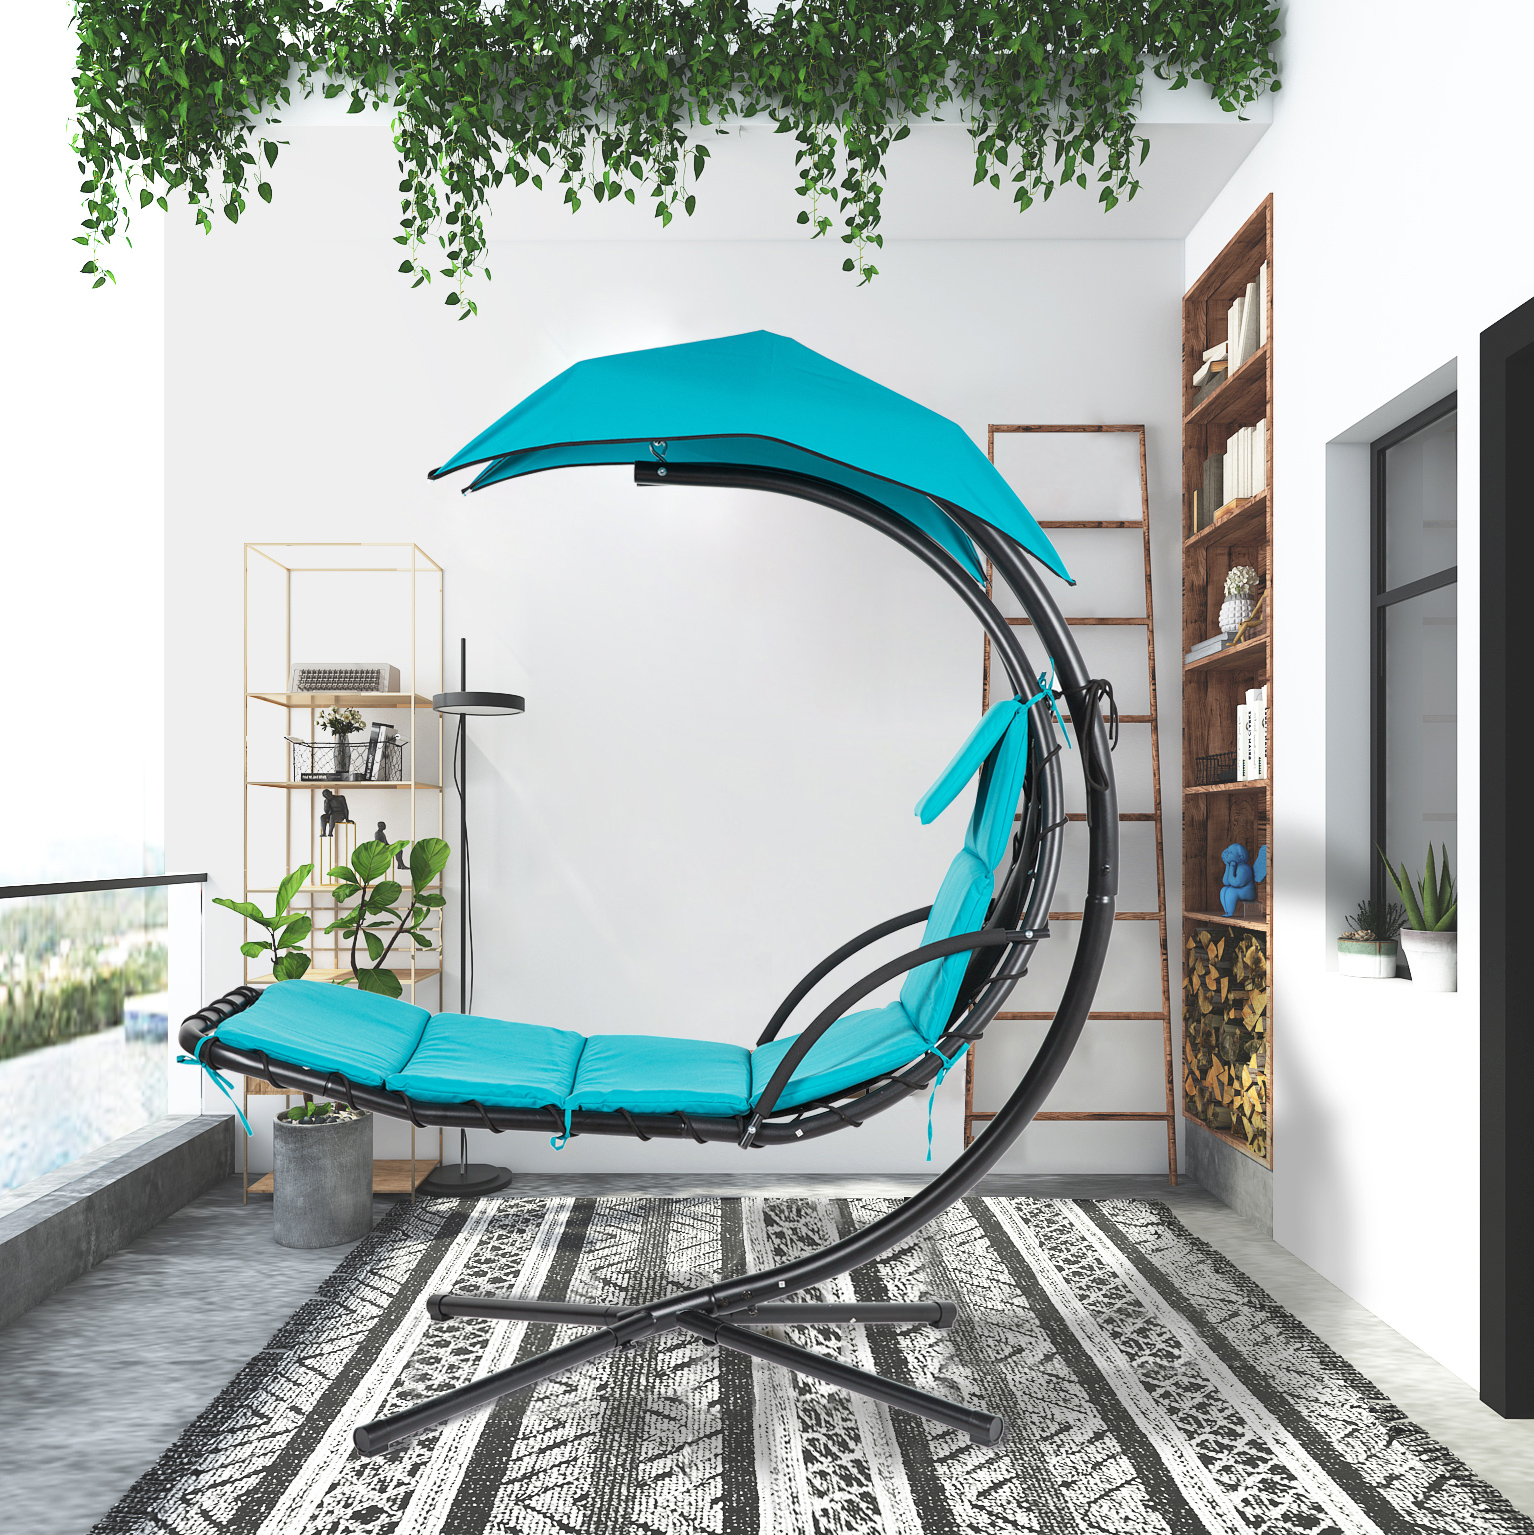 Finefind Hanging Chaise Lounge Chair Floating Swing Hammock Chair Steel Patio, Blue - image 1 of 7